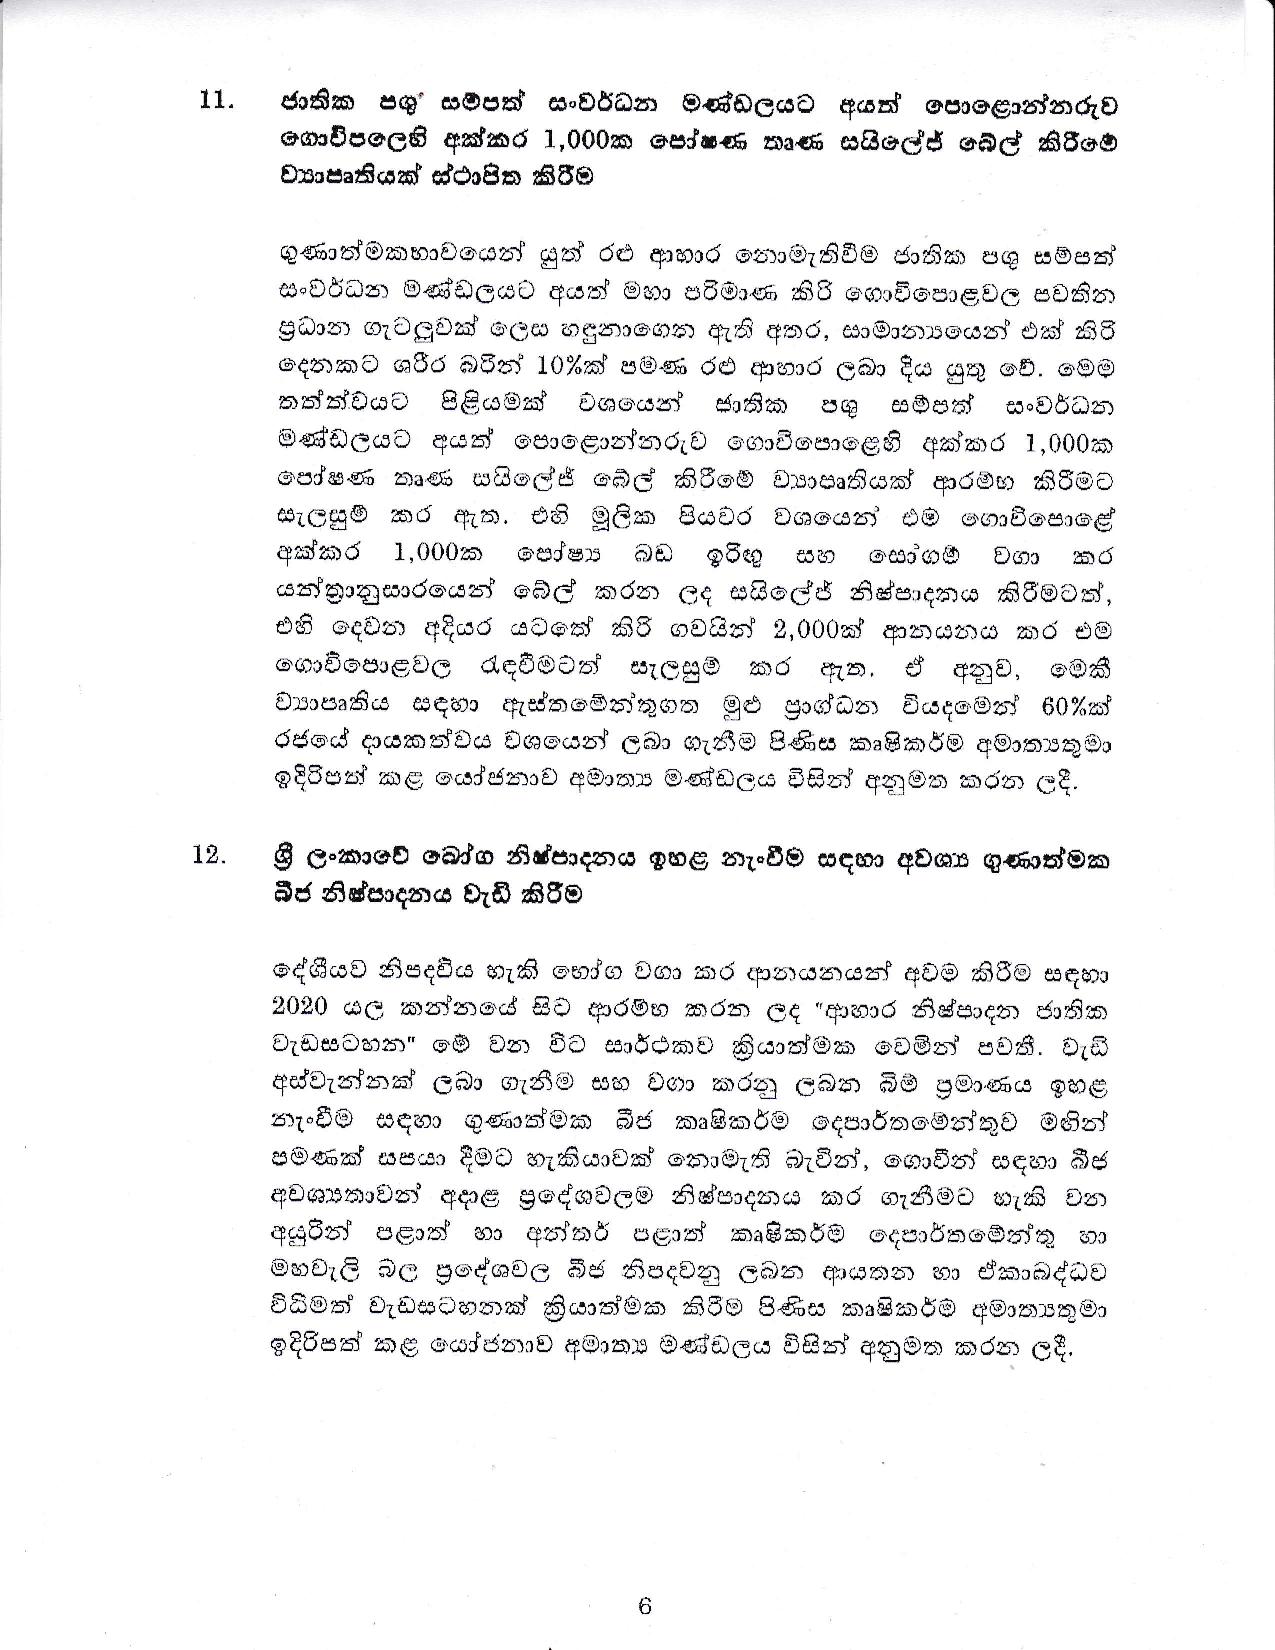 Cabinet Decision on 07.12.2020 page 006